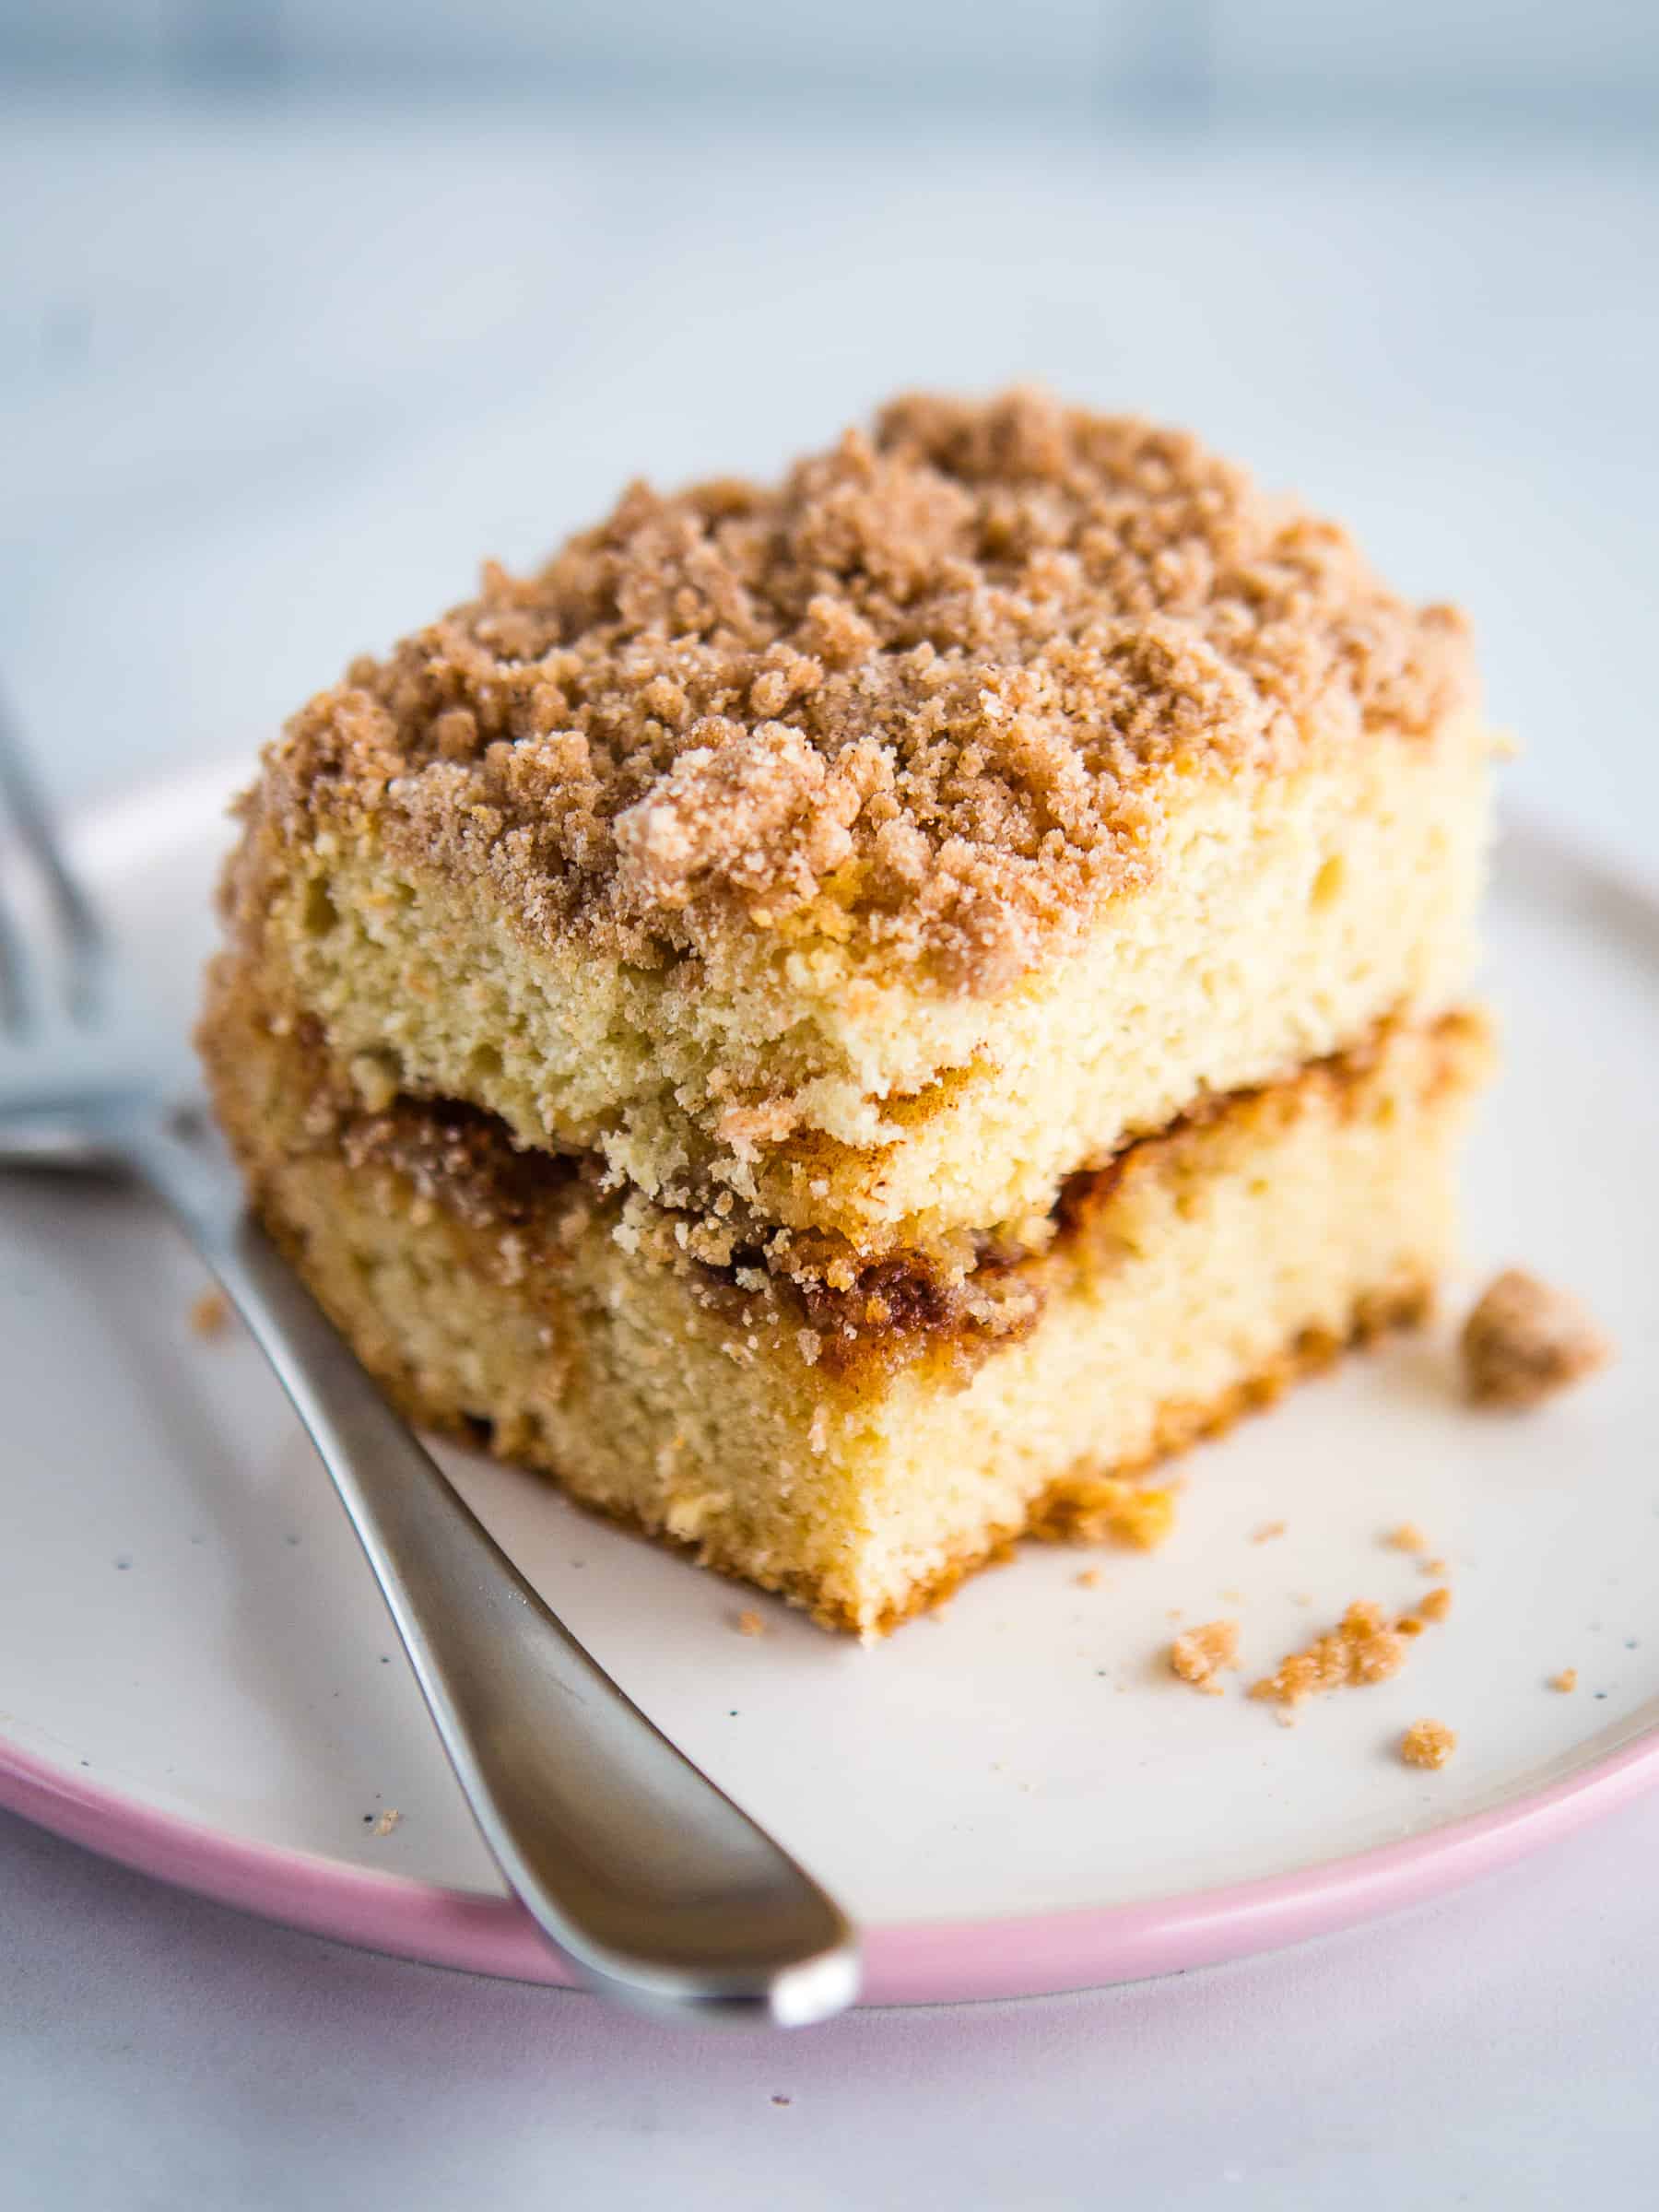 A slice of gluten-free coffee cake on a plate.